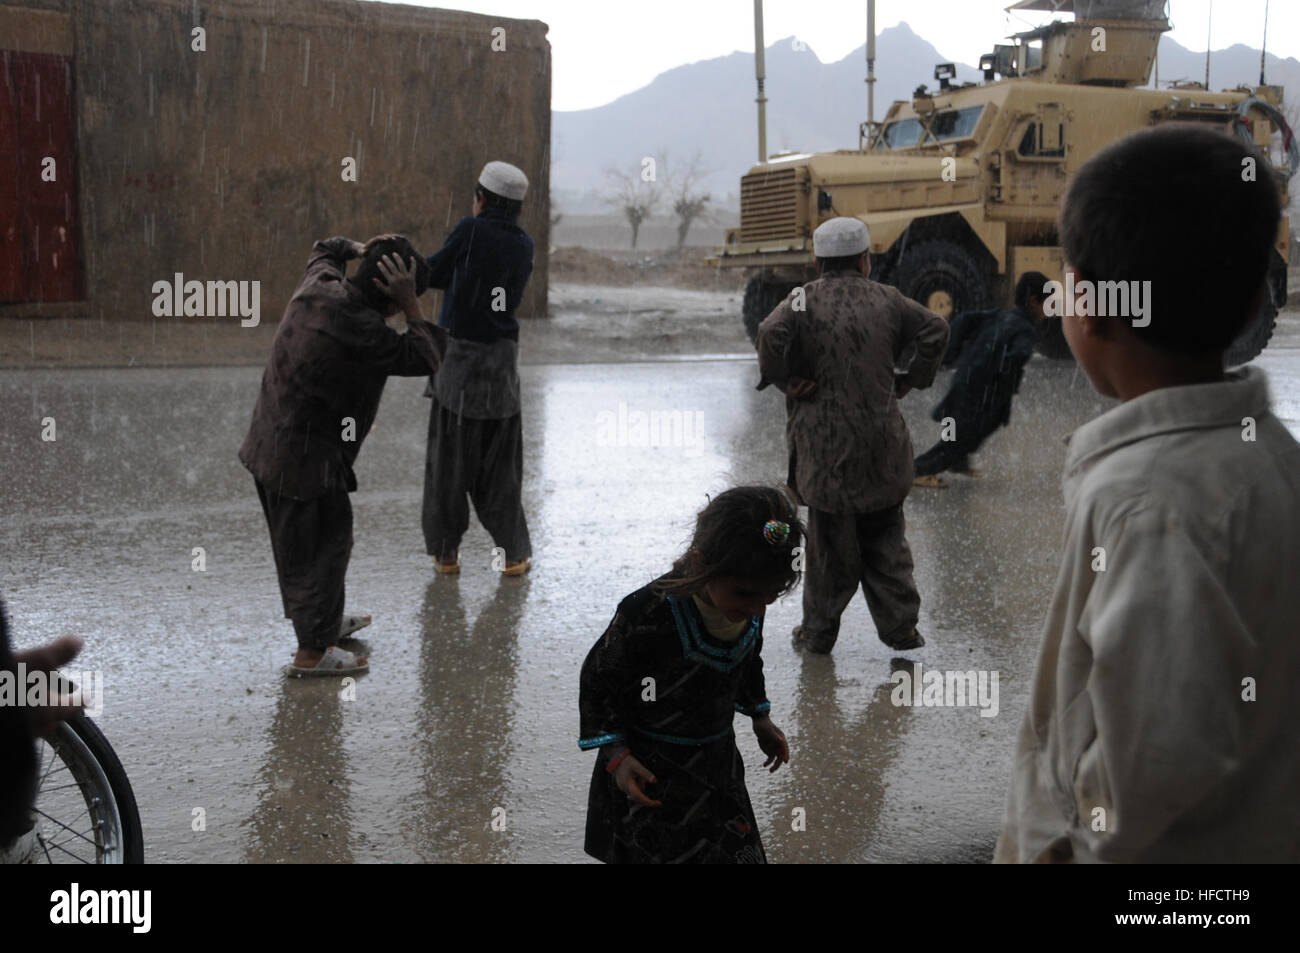 Farahi children run out to play in the rain and hail during an afternoon thunderstorm outside the site of a key leader engagement attended by members of Provincial Reconstruction Team (PRT) Farah in Farah City, Feb. 25.  Civilian and military representatives from the PRT visited a newly constructed Family Guidance Center operated by the Afghan-operated NGO Voice of Women in Farah City to discuss gender issues, conduct a site survey and monitor programming.  PRT Farah's mission is to train, advise, and assist Afghan government leaders at the municipal, district, and provincial levels in Farah p Stock Photo